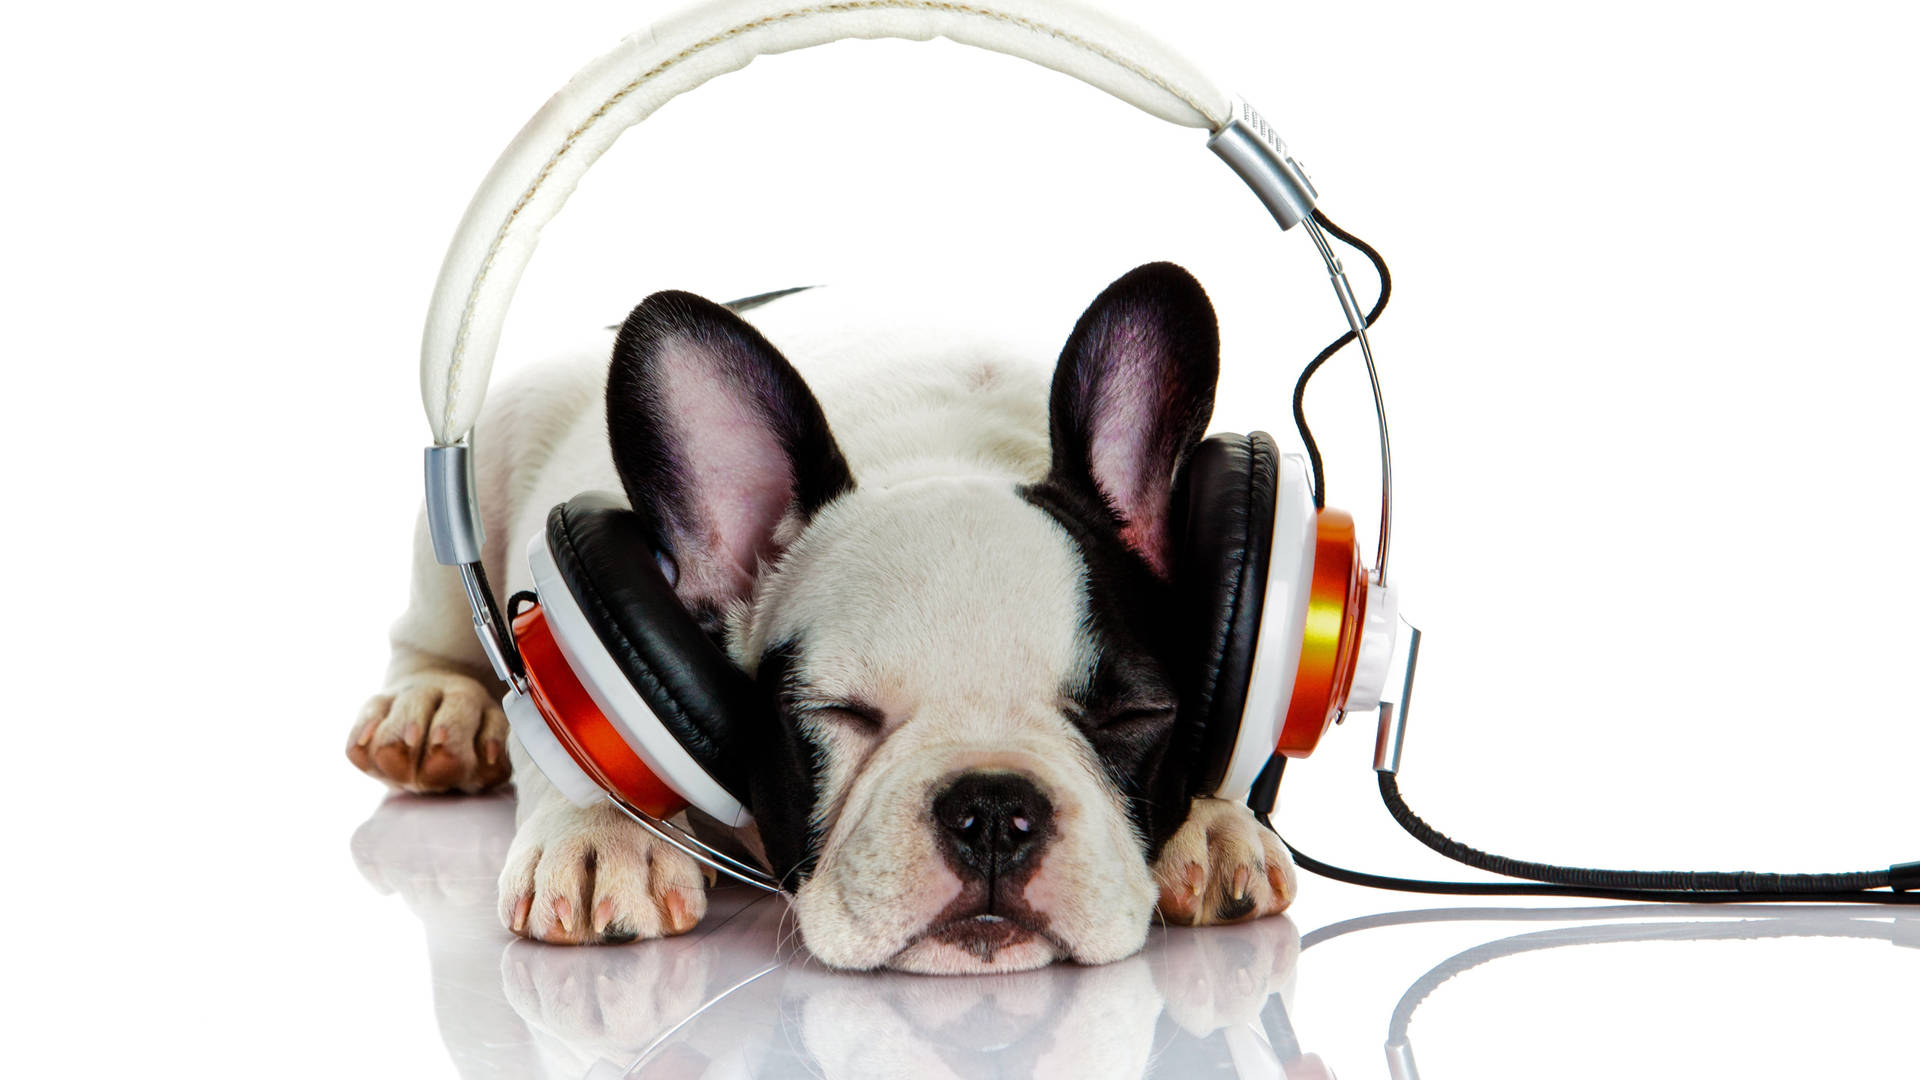 Show Your Friends And Family The Latest Tech By Sending Them A Picture Of This Cool Pup With A Headset. Background